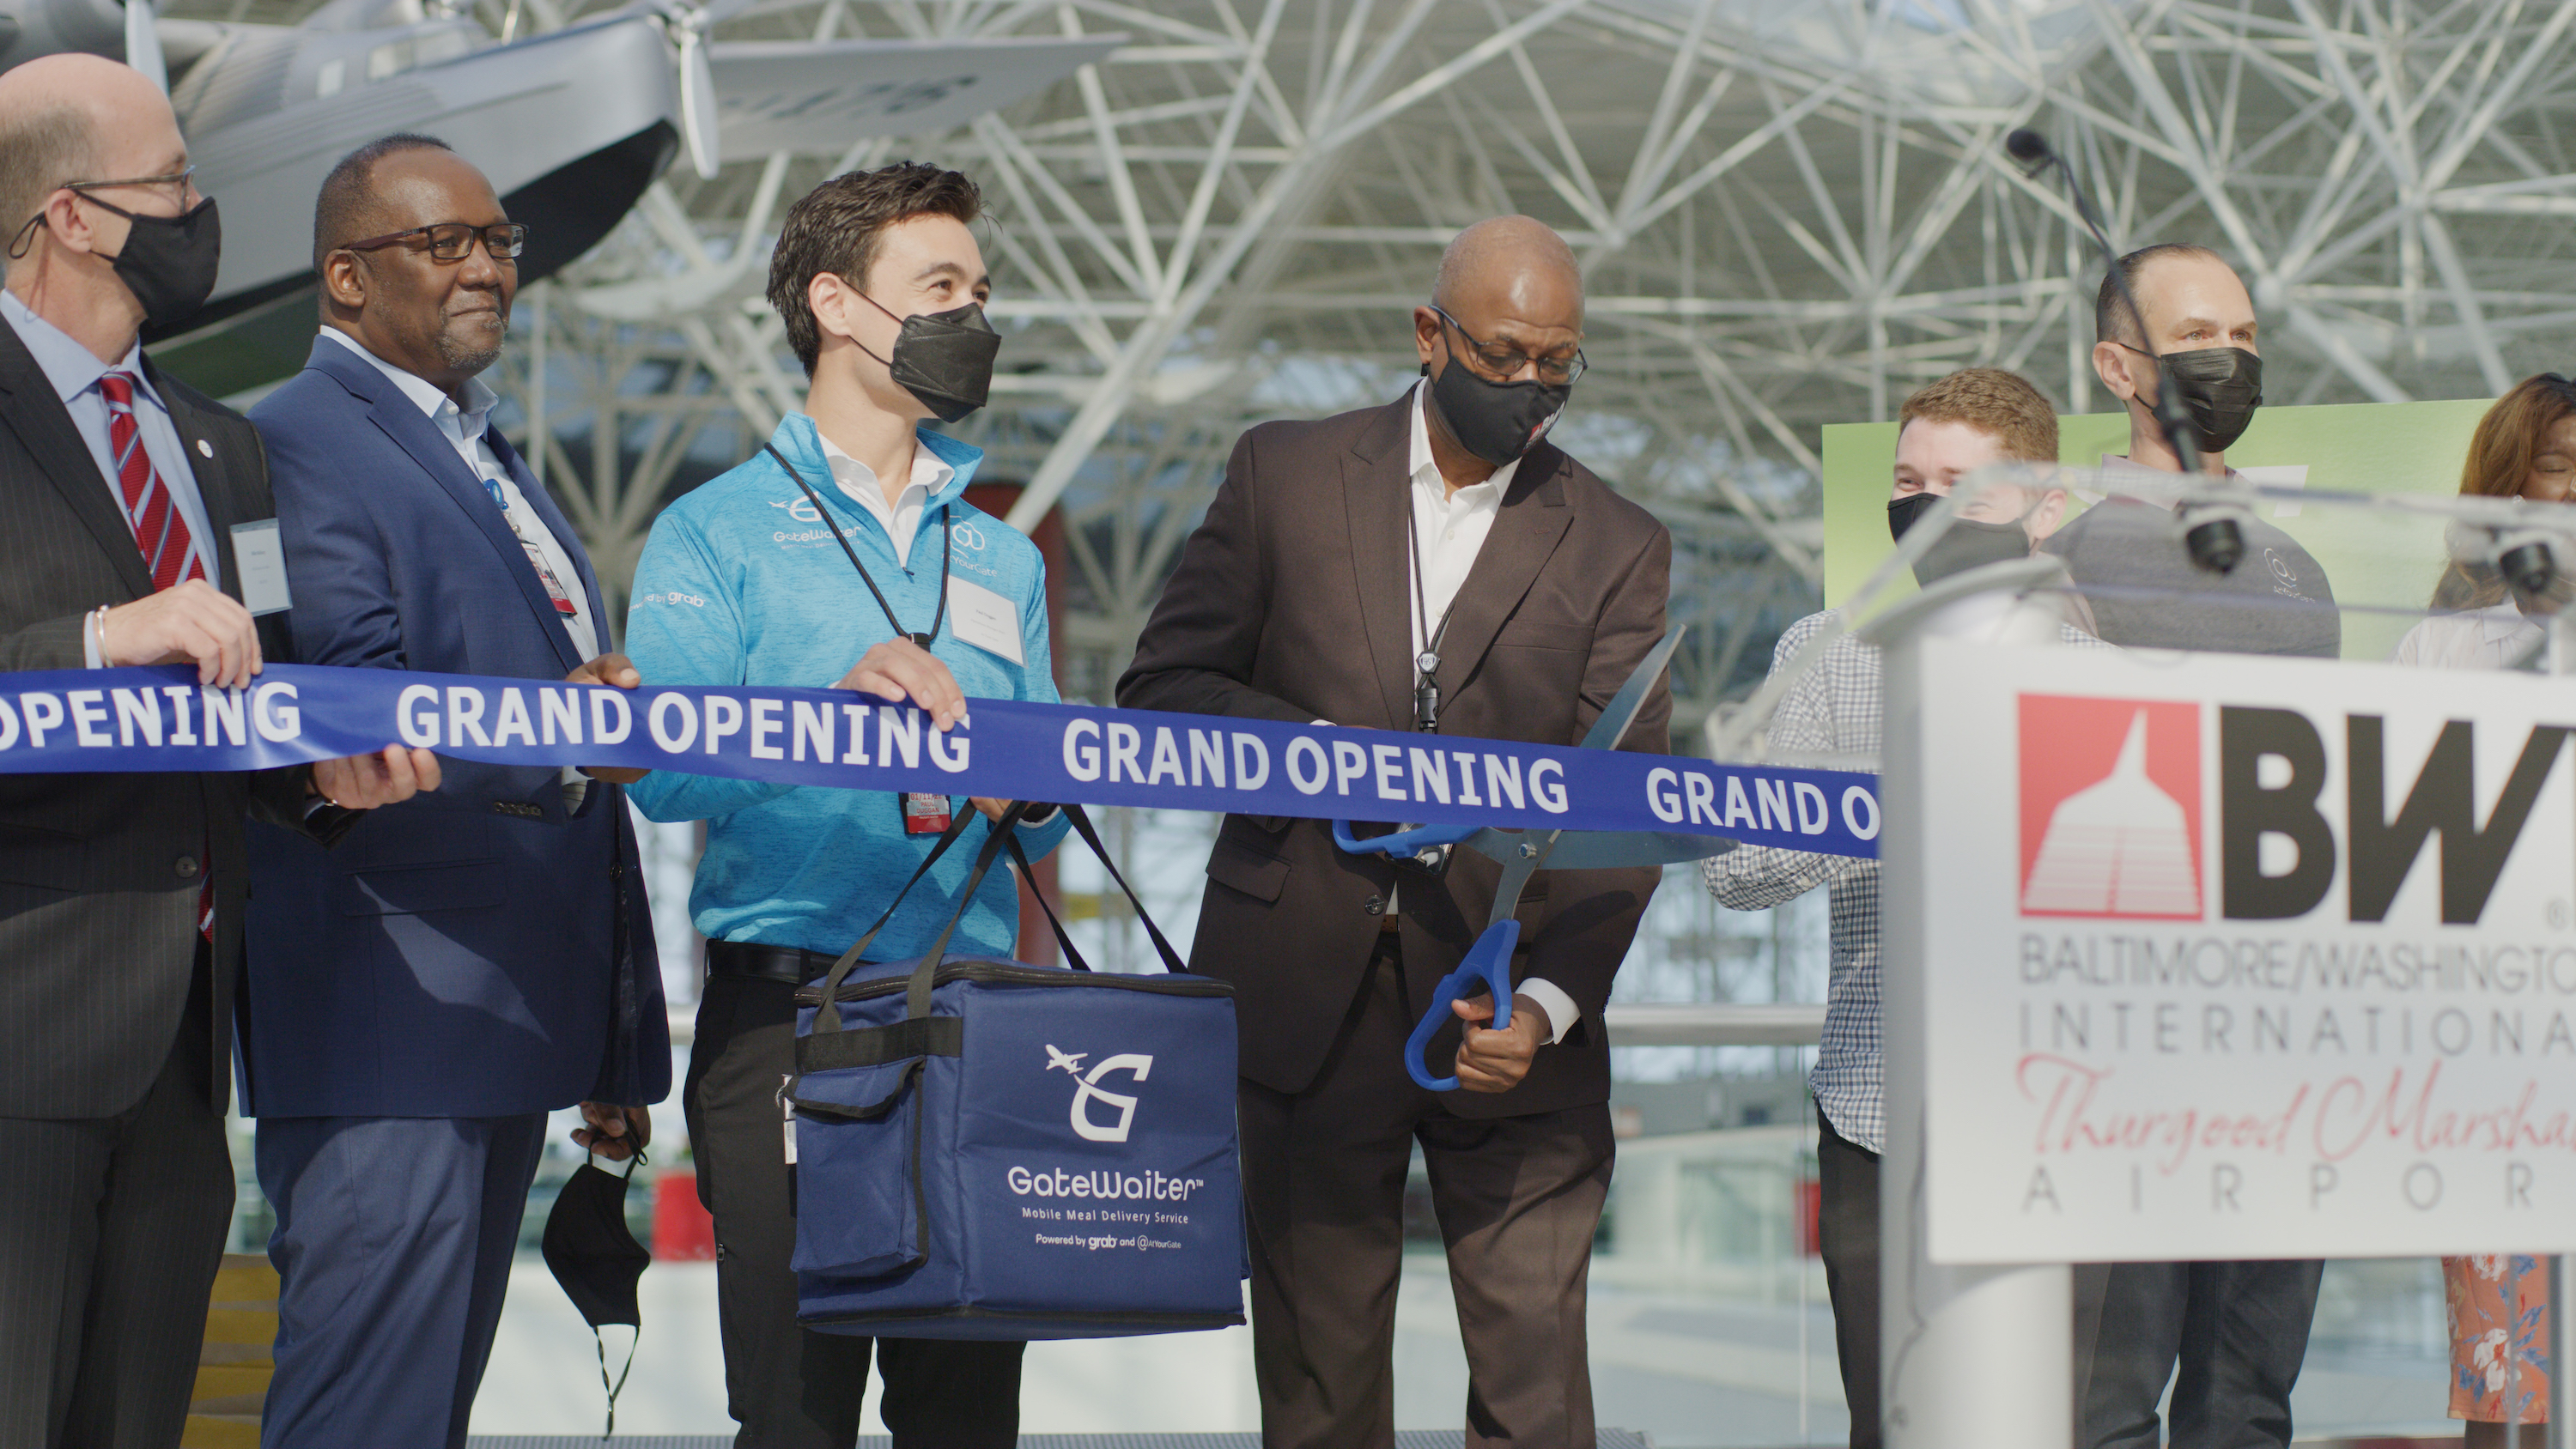 Fraport USA partners with Servy to launch GateWaiter™ mobile ordering and delivery service at select airports